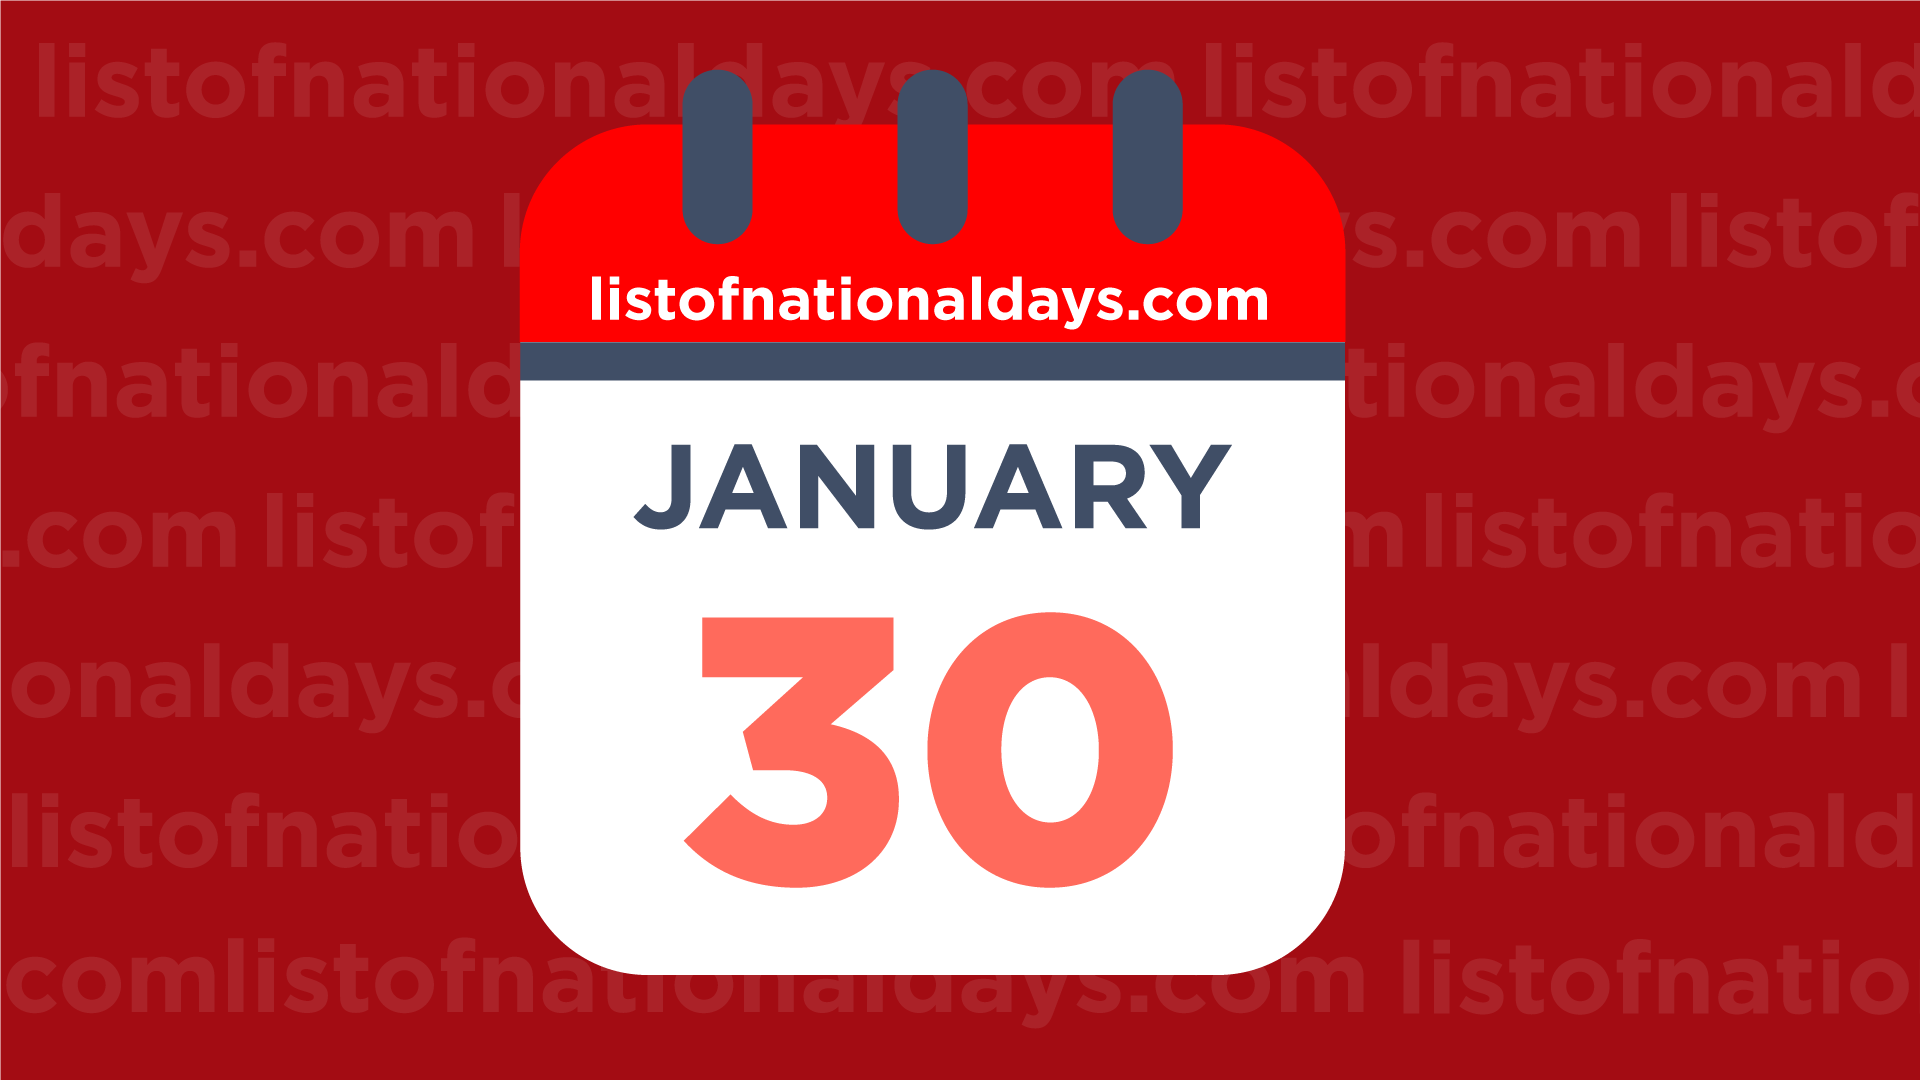 JANUARY 30TH: National Holidays,Observances & Famous Birthdays